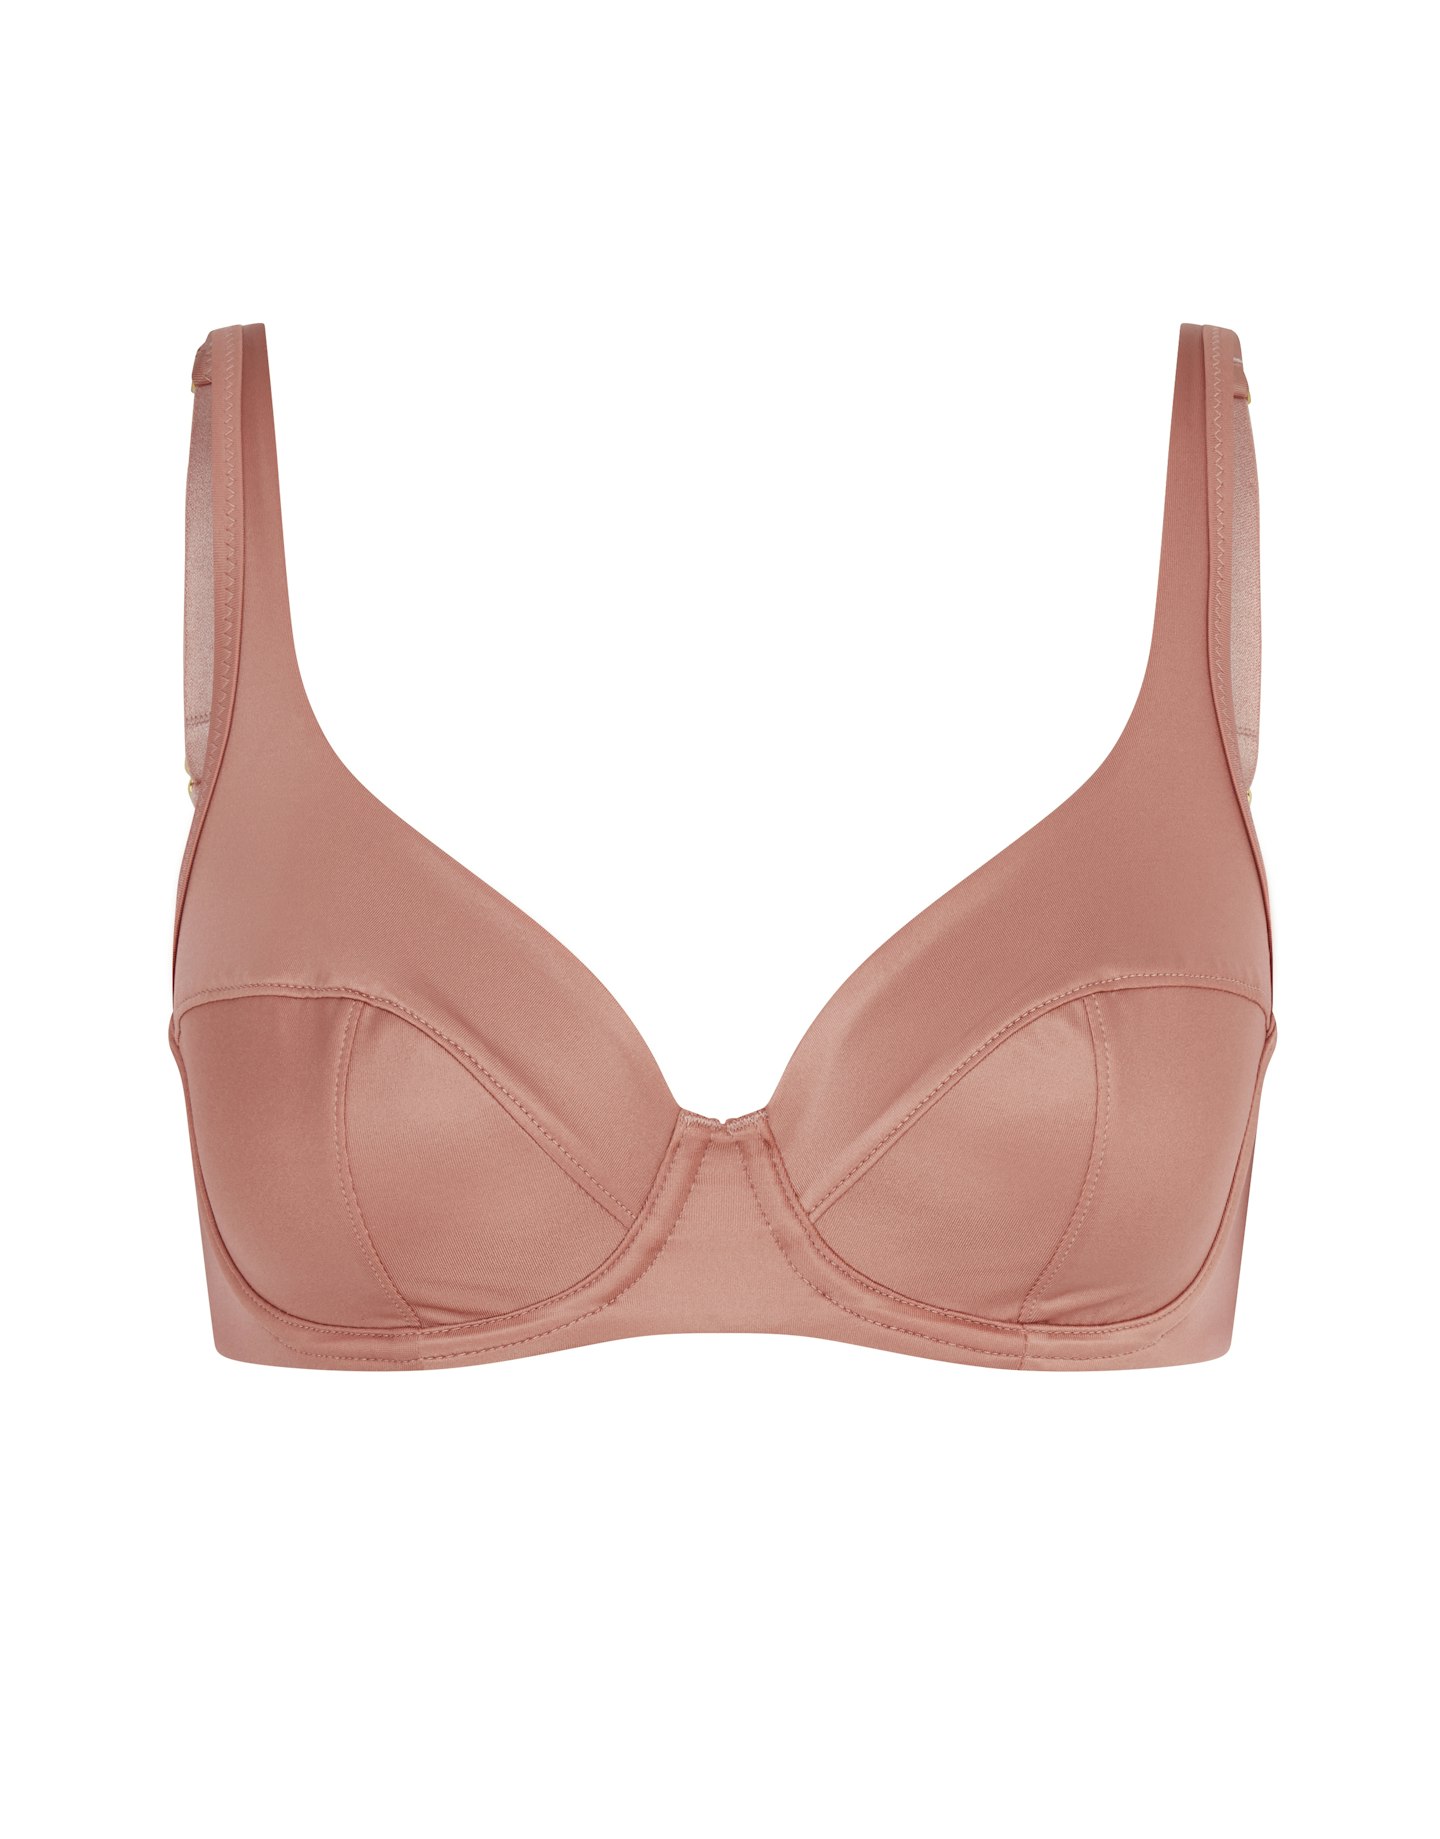 SELF - 21 Best Lingerie Brands That Make Great Bras For Big Busts – Adina  Reay